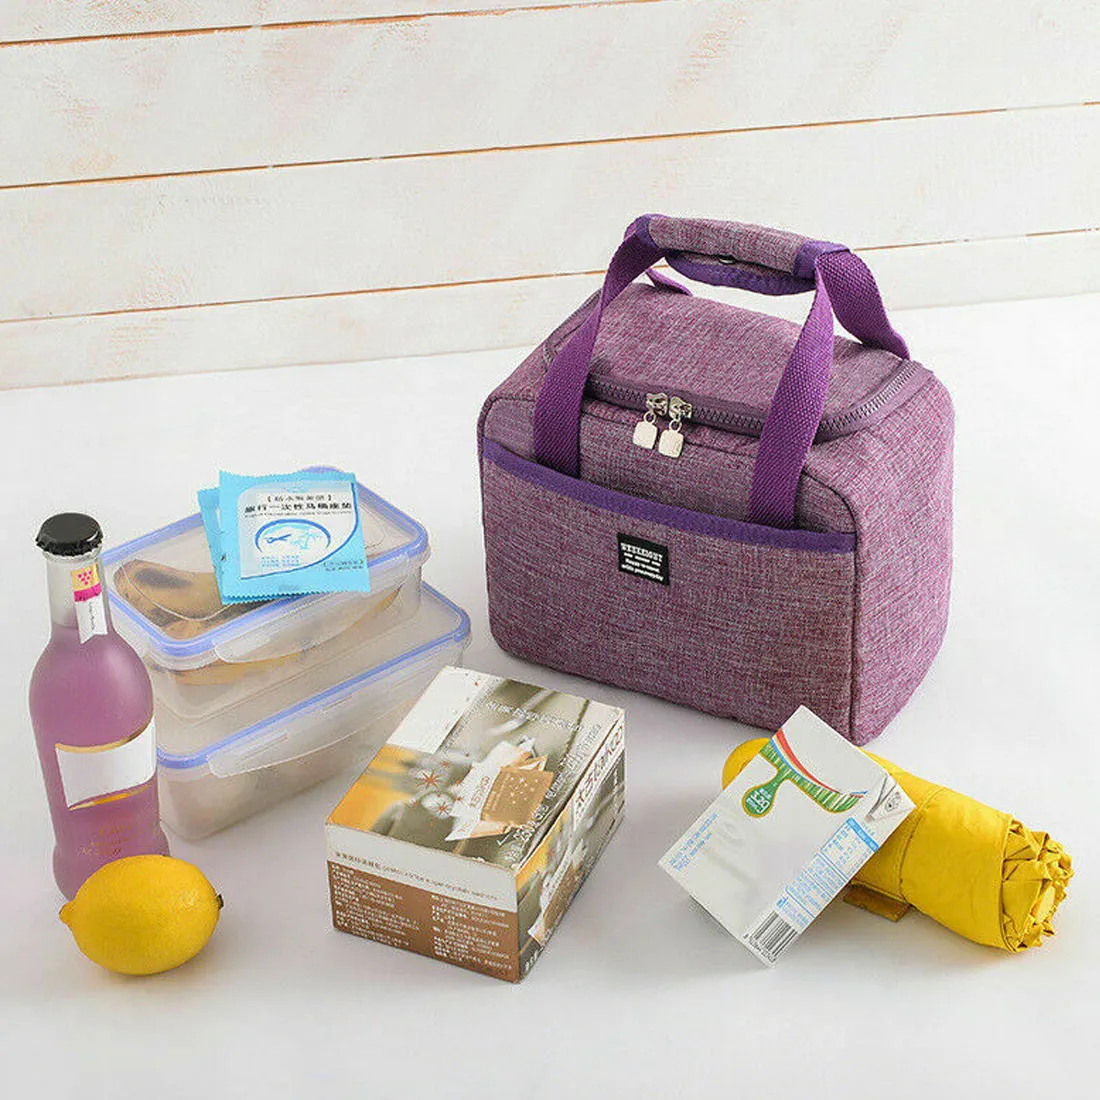 Dihope Portable Lunch Bag New Thermal Isolated Box Tote Cooler Handbag Bento Pouch Dinner Container School Food Storage C01252387421